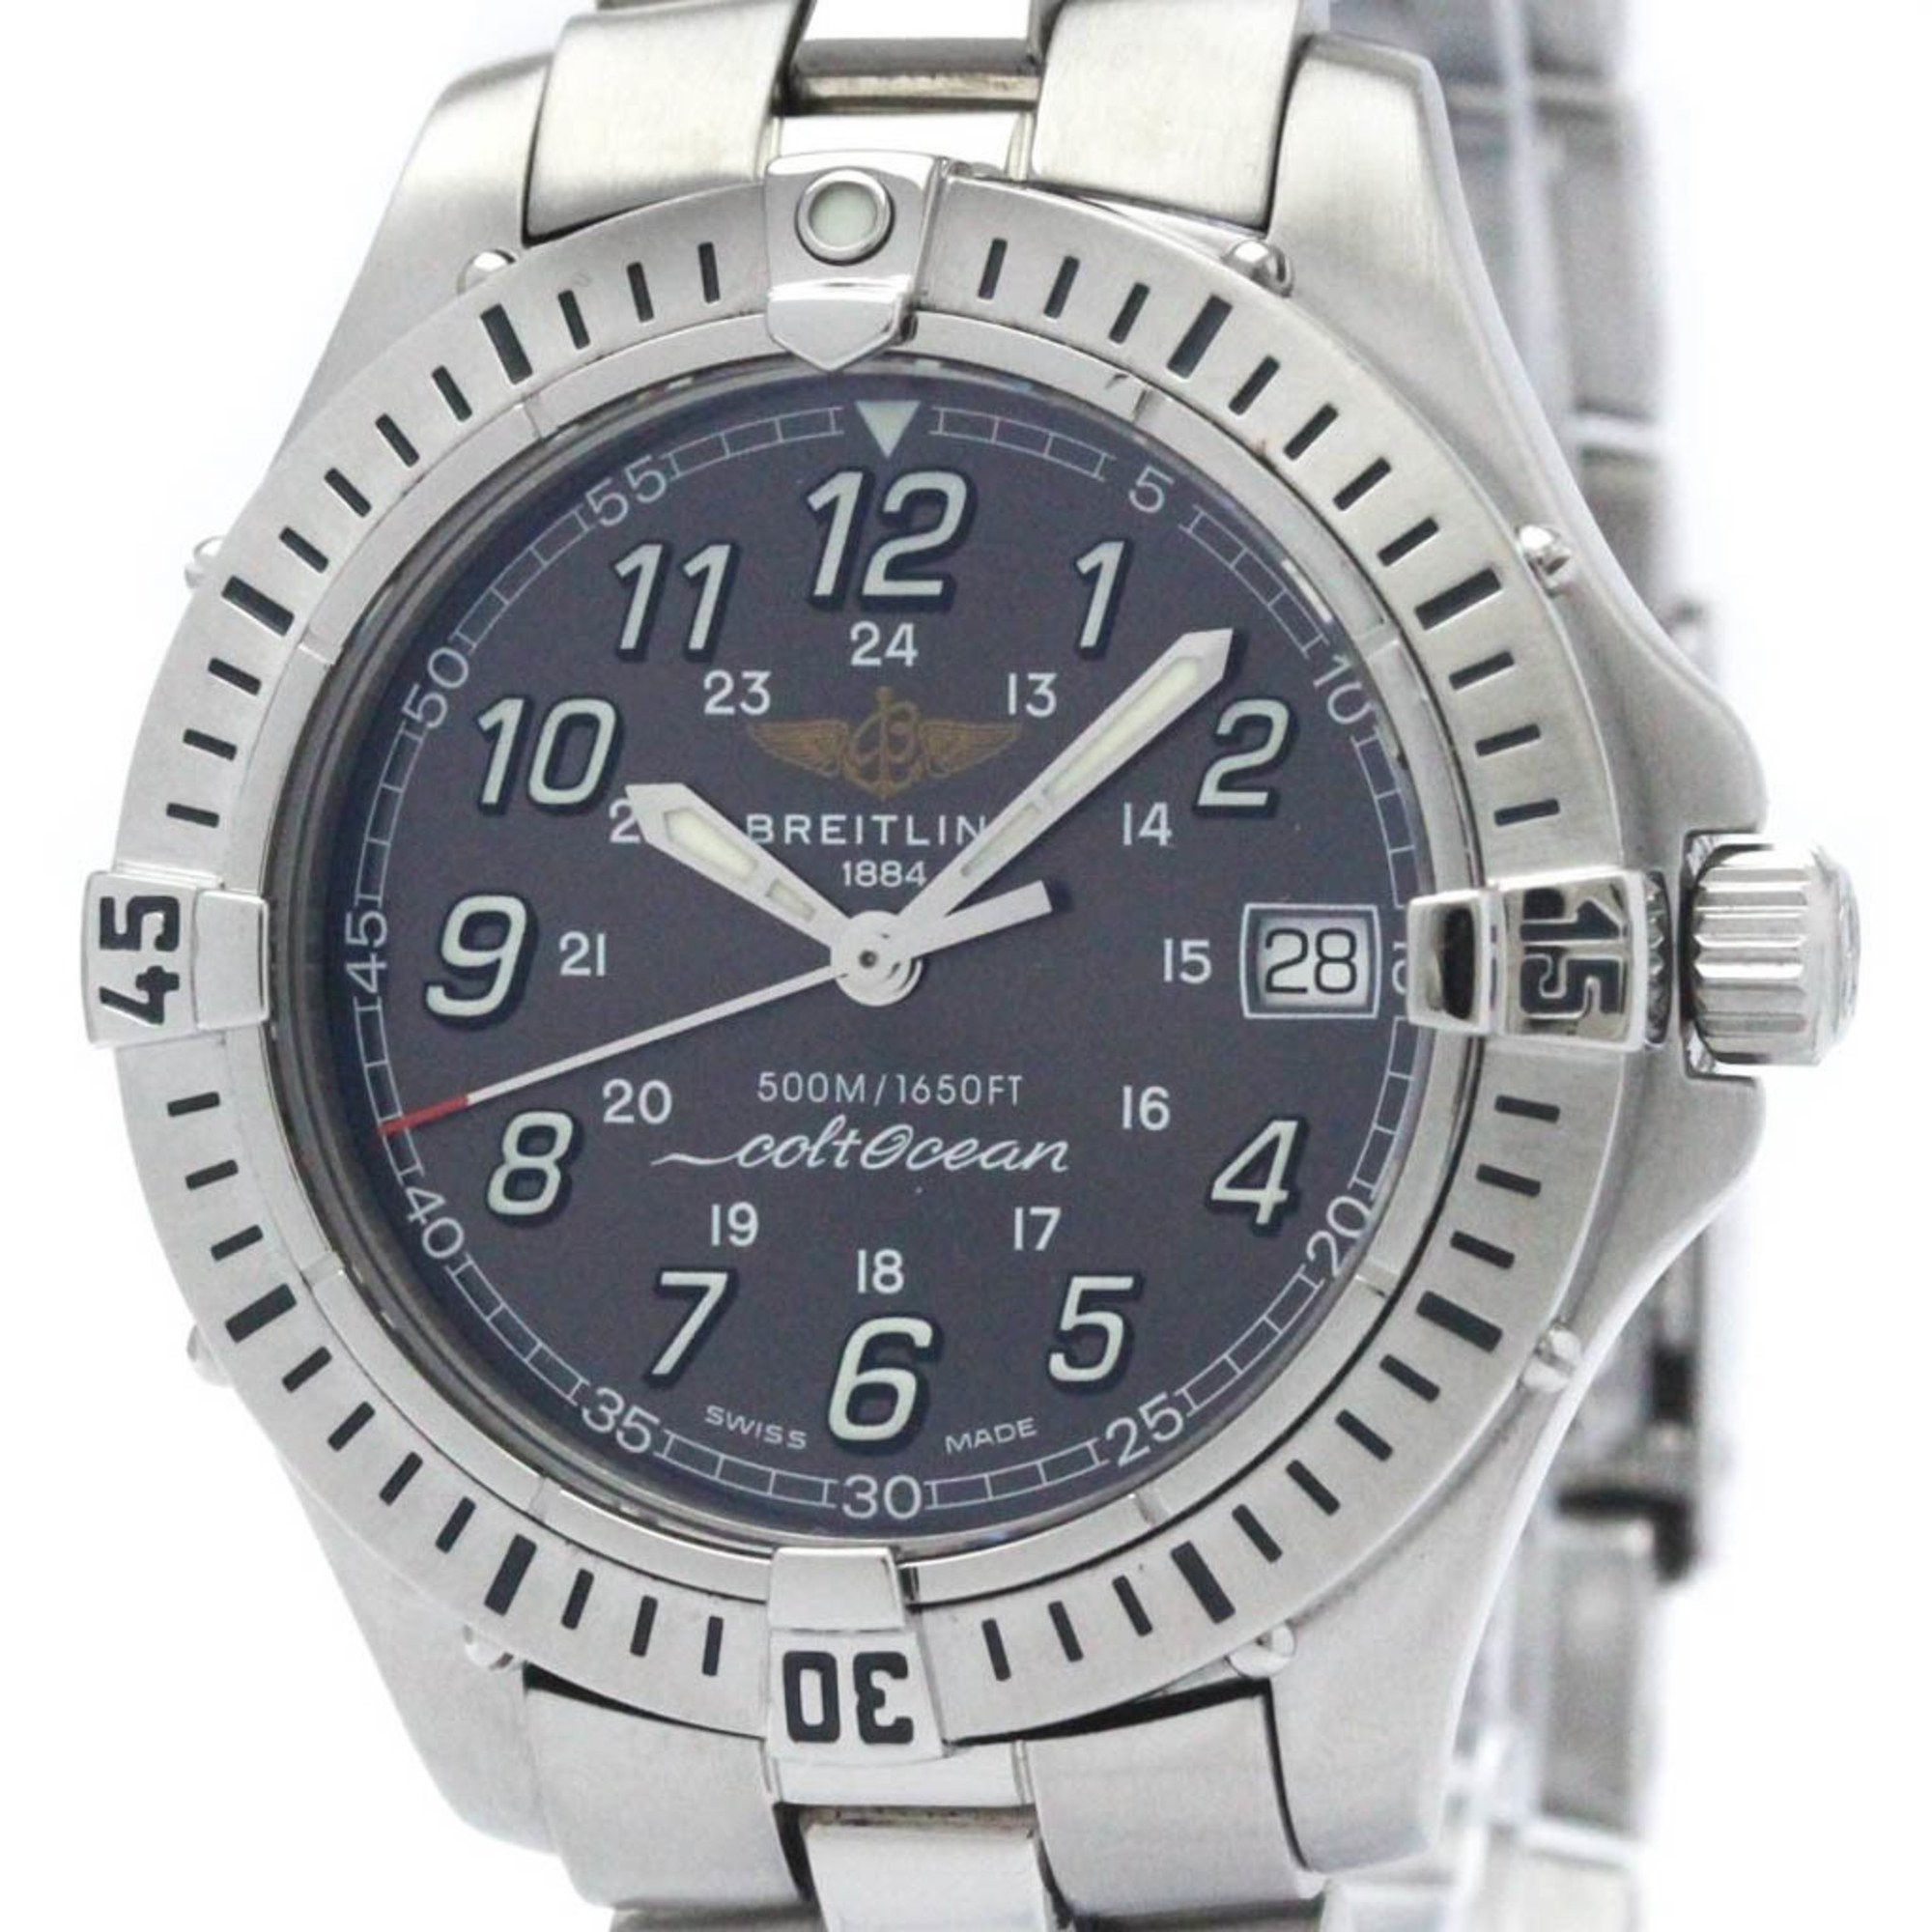 image of Polished Breitling Colt Ocean Stainless Steel Quartz Mens Watch A64350 Bf569962 in Grey, Women's